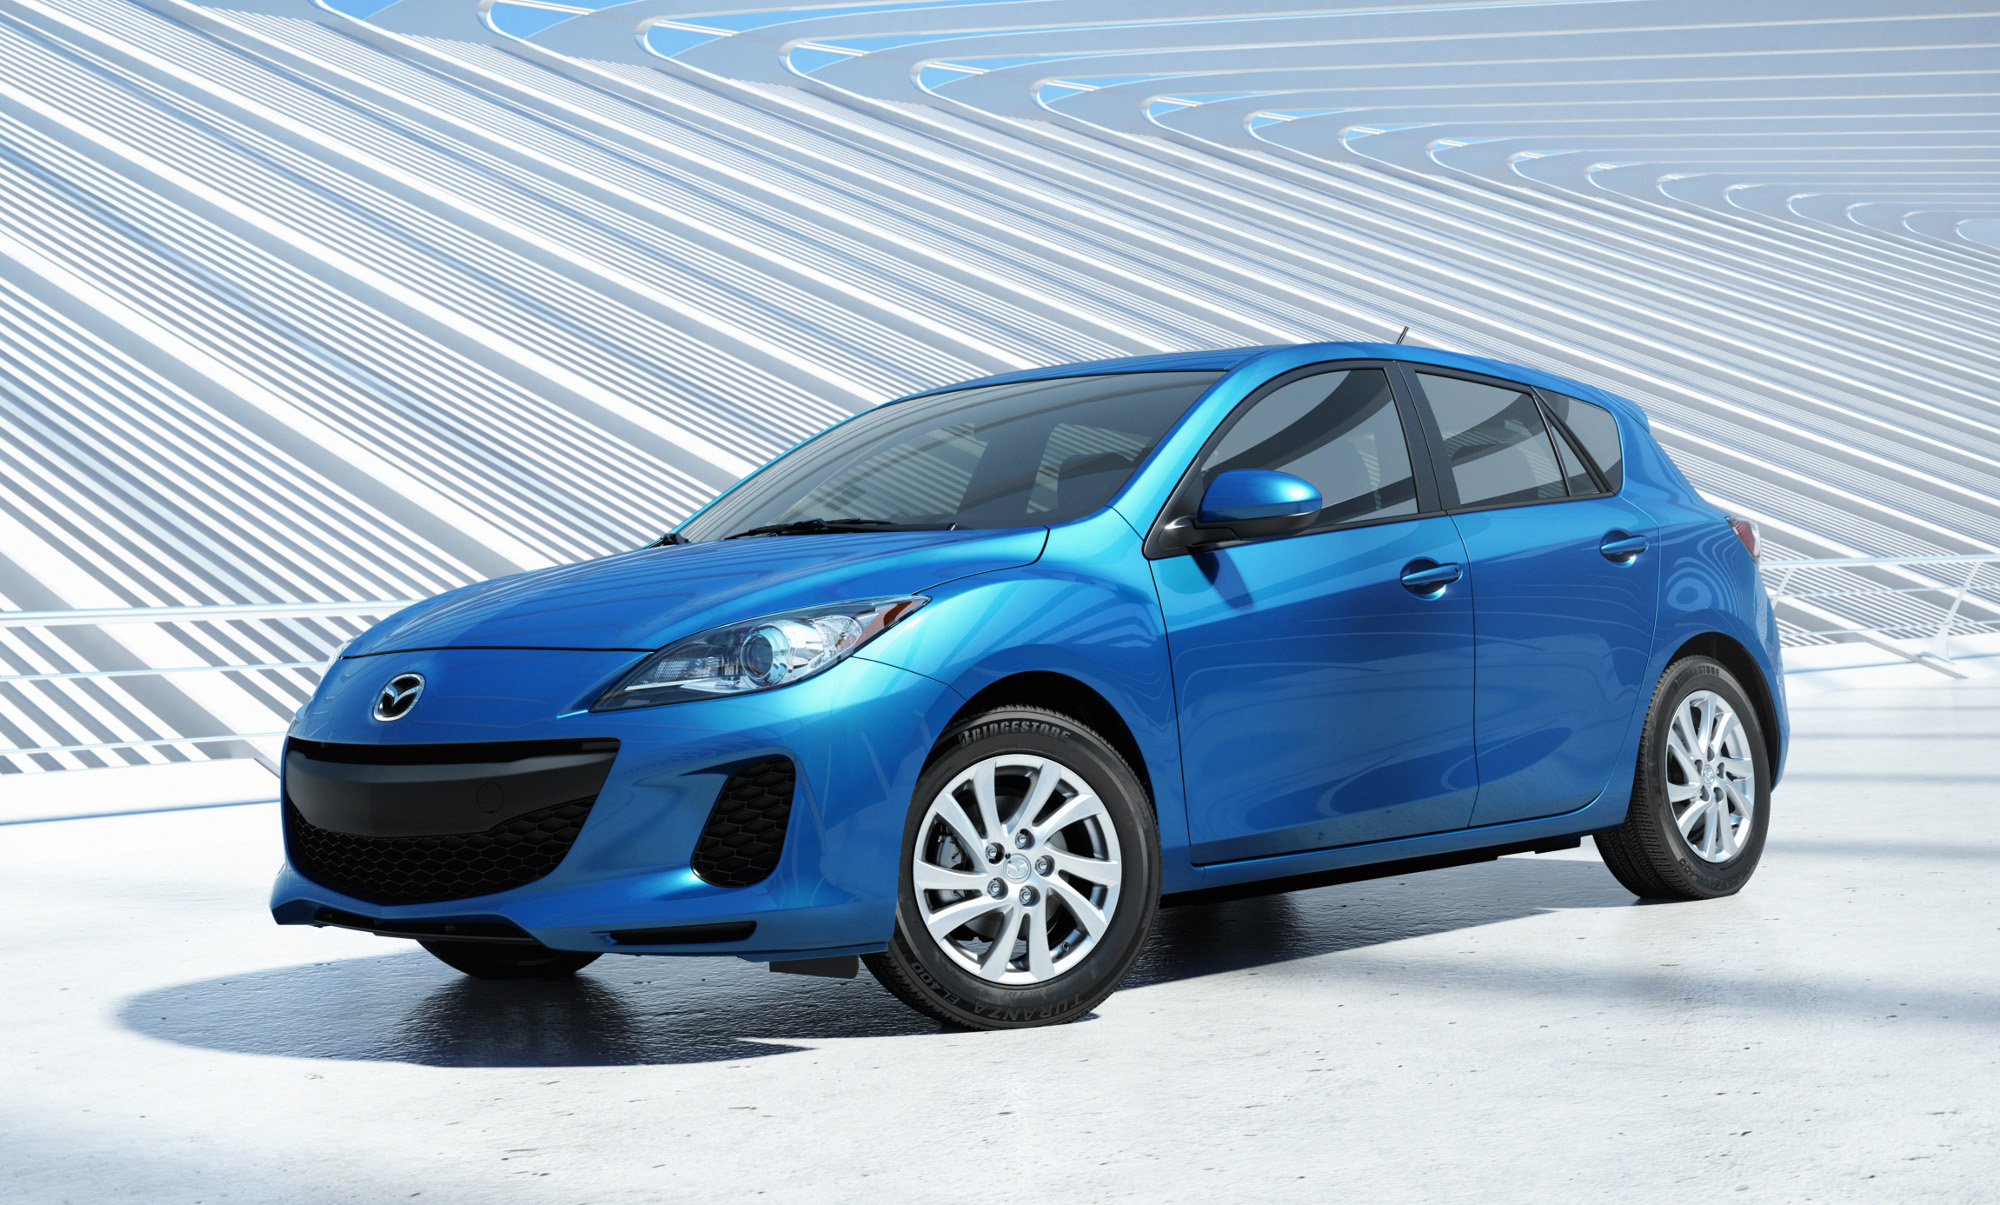 2012 Mazda Mazda3 Review Ratings Specs Prices And Photos